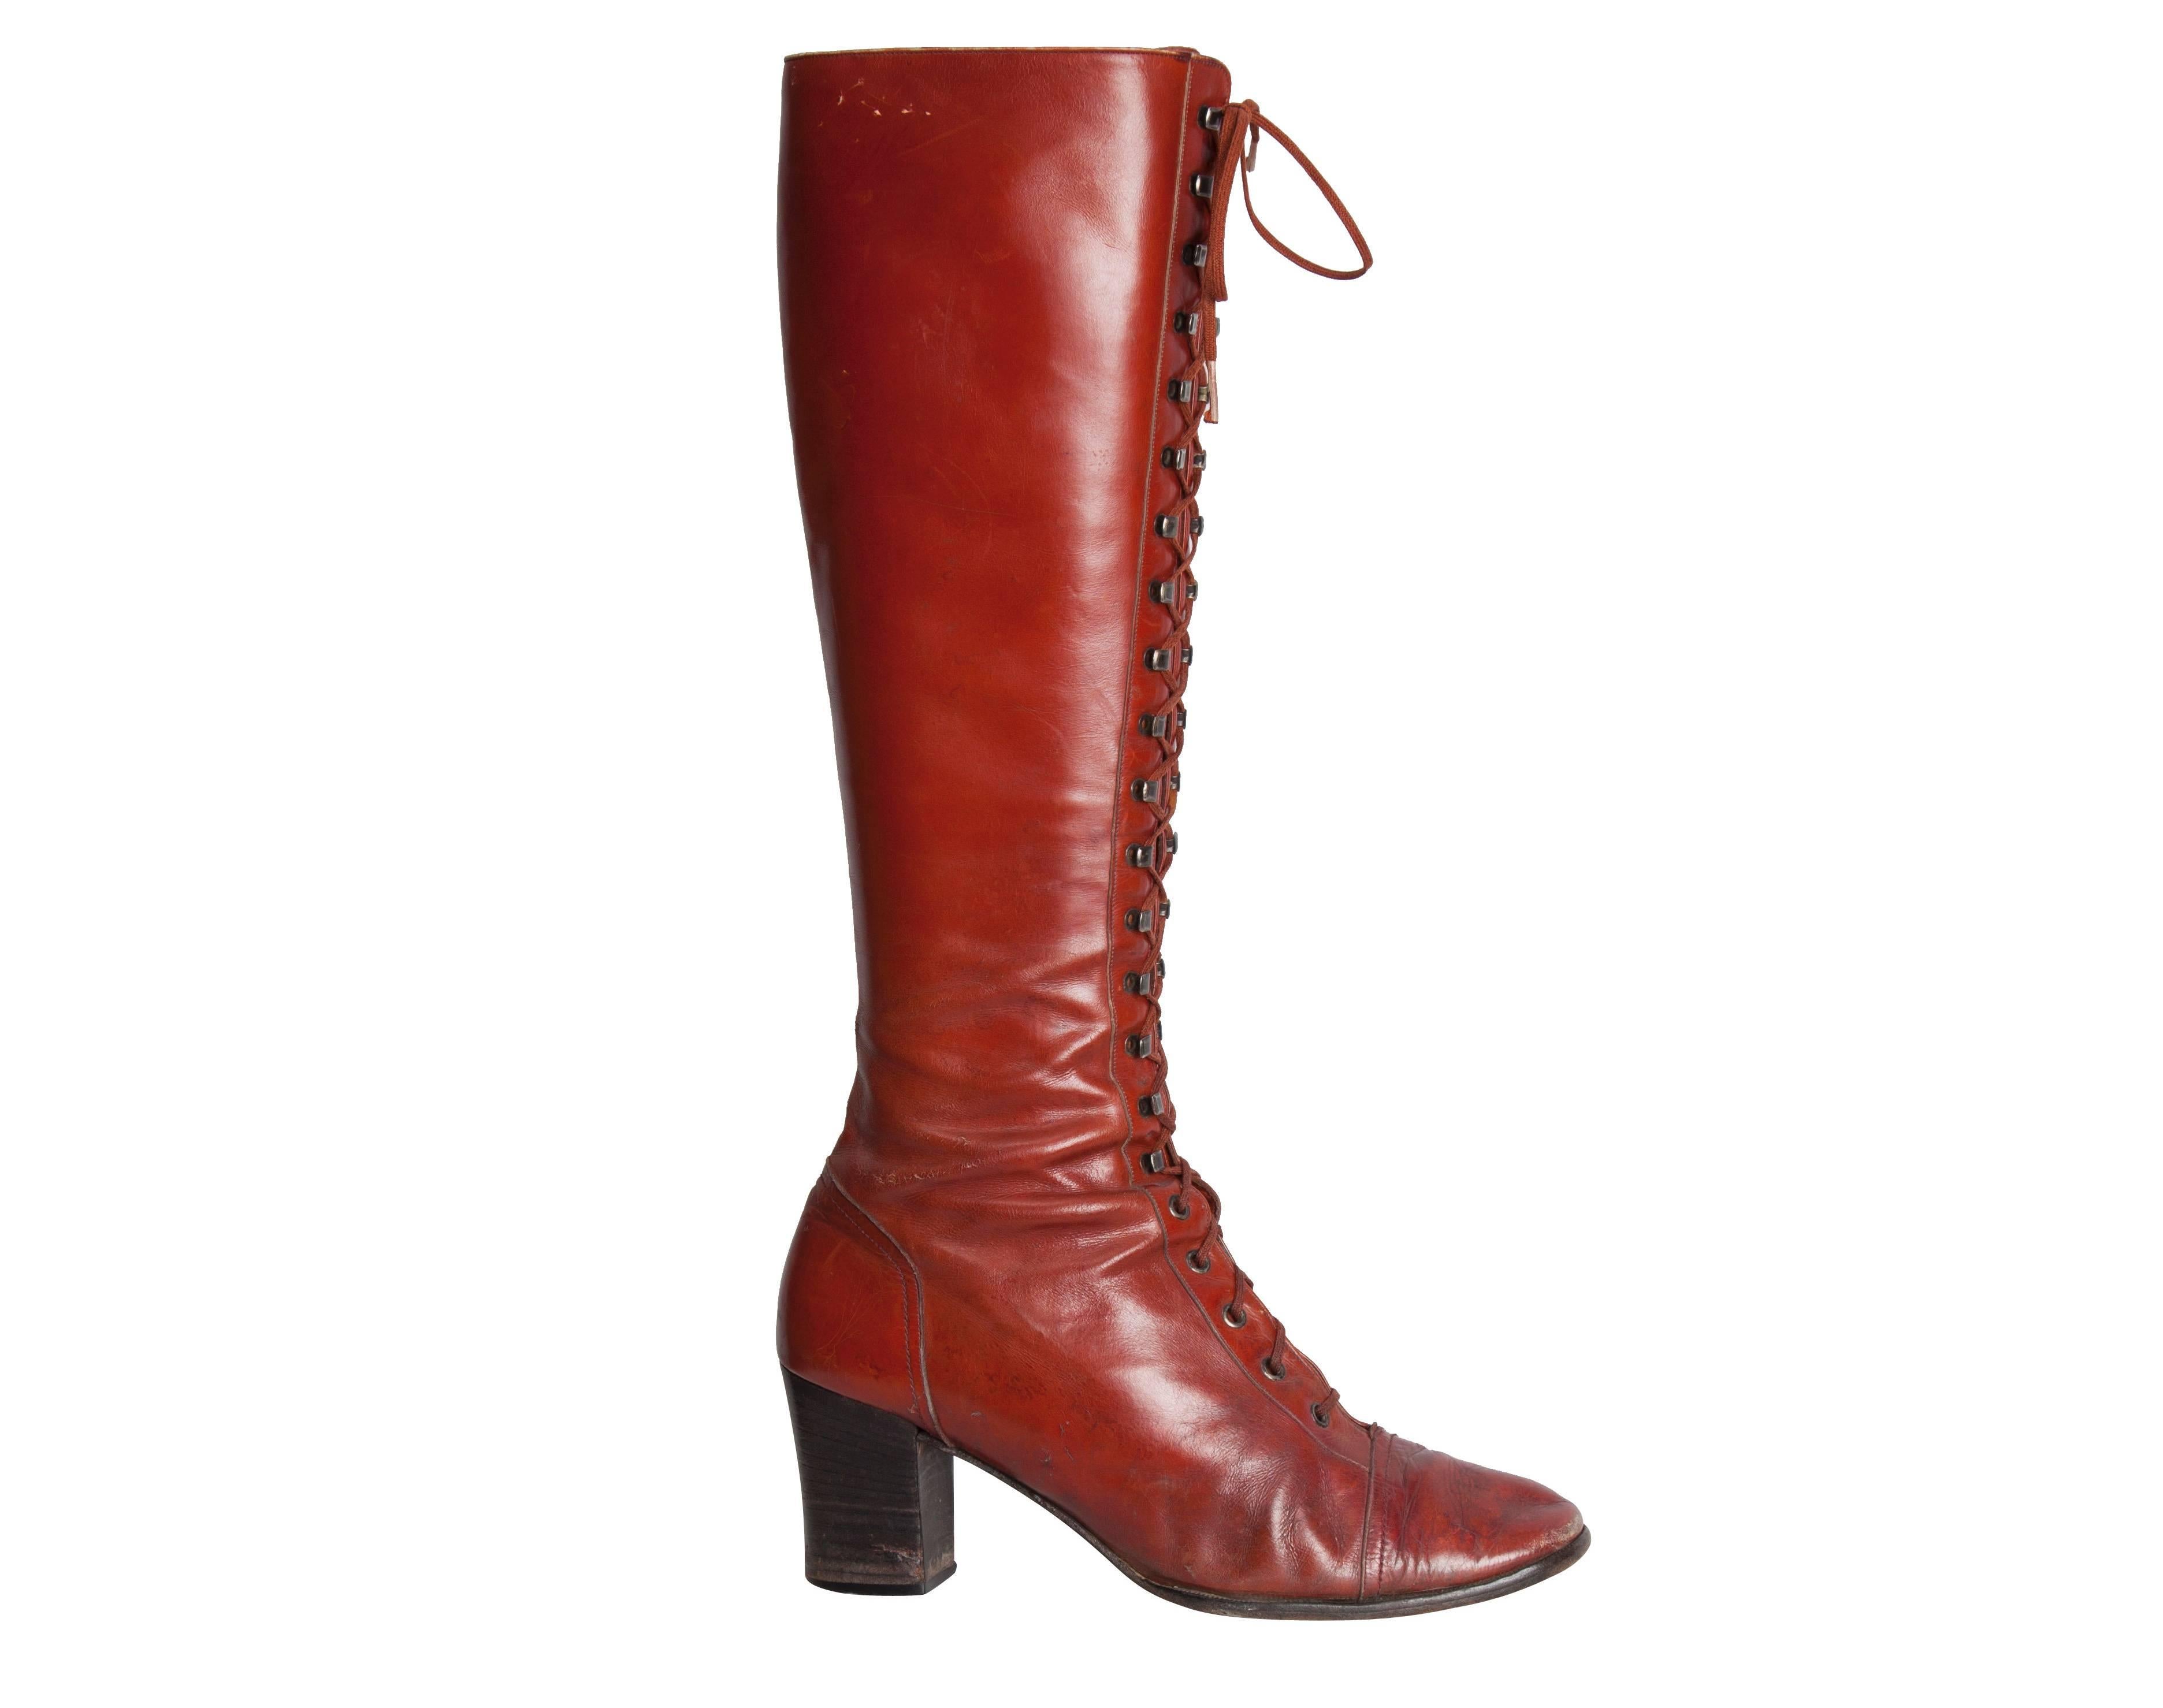 A pair of Yves Saint Laurent Couture brick red leather tall lace-up boots. These mid-calf length boots lace up the entire length of the front using silver metal stud fastenings. They feature a round toe and a chunky black mid-height heel. Excellent